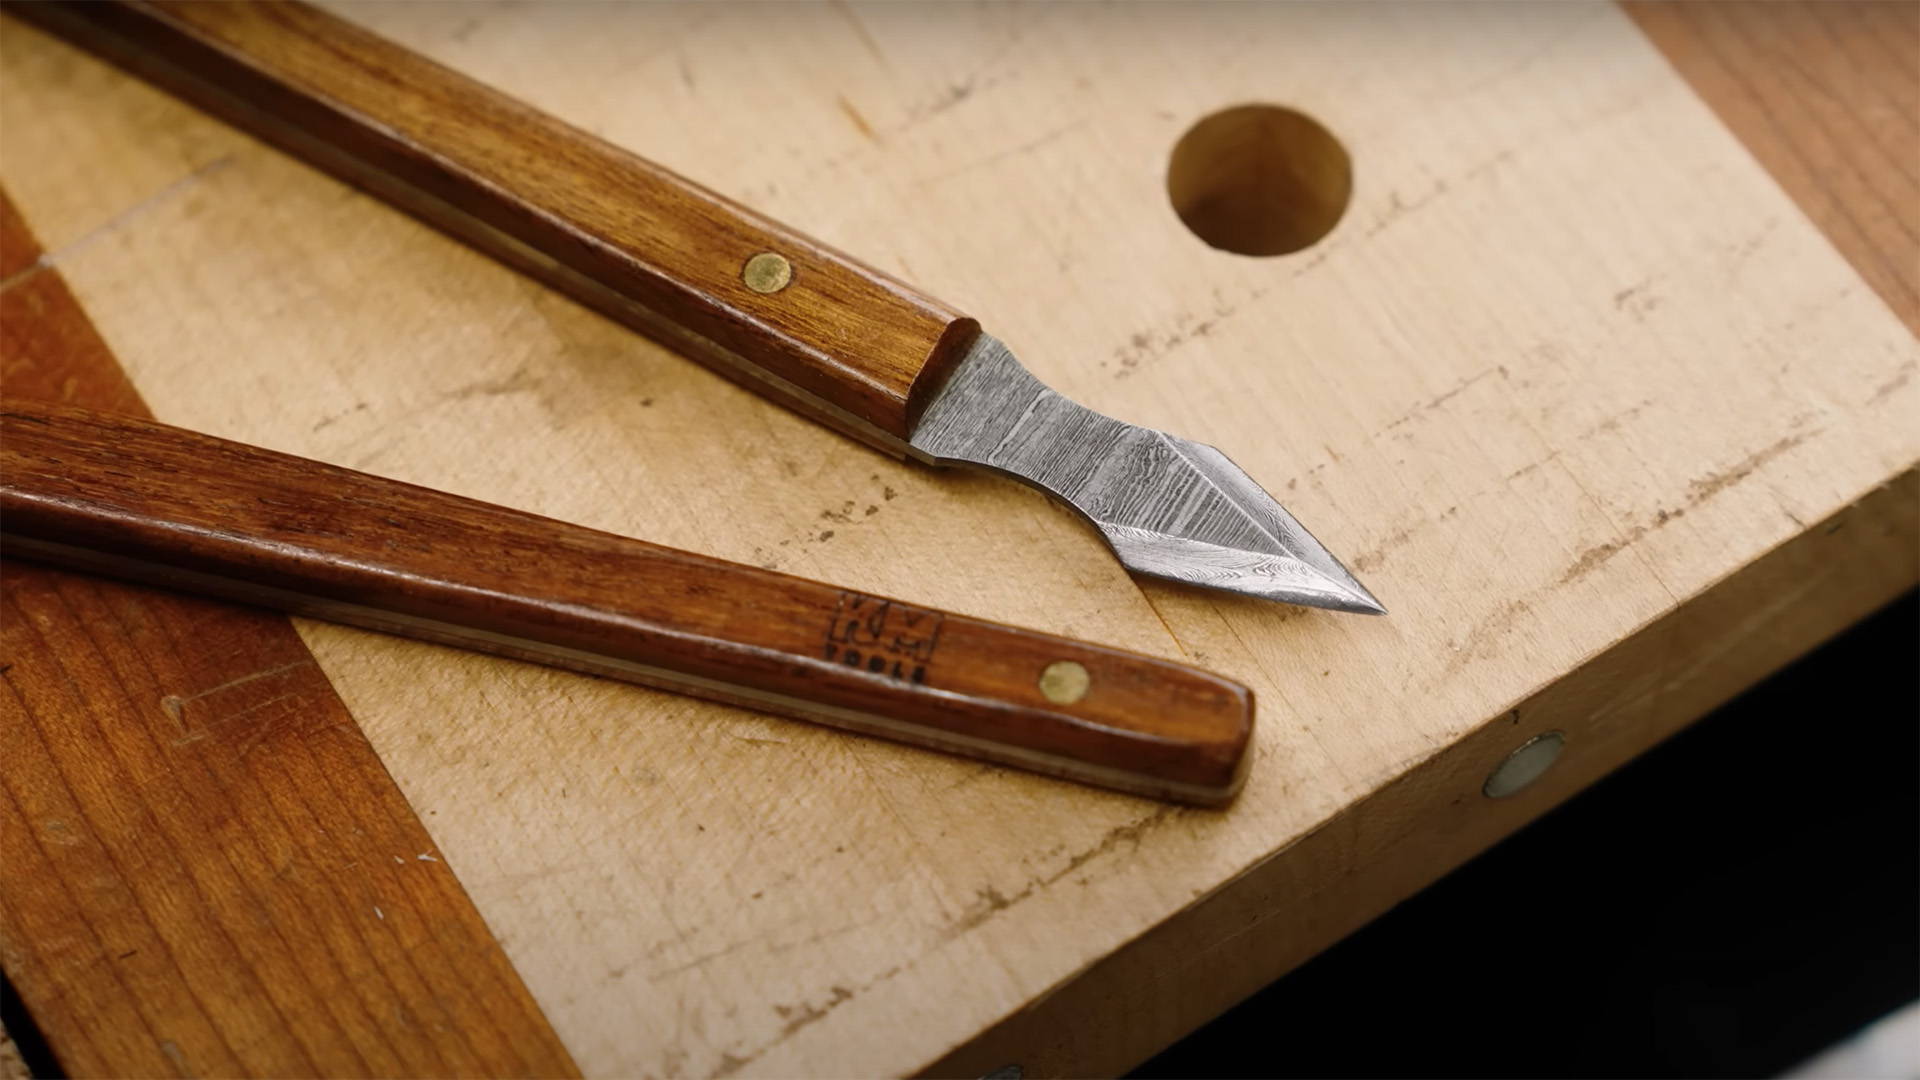 square - Difficulties using a marking knife - Woodworking Stack Exchange